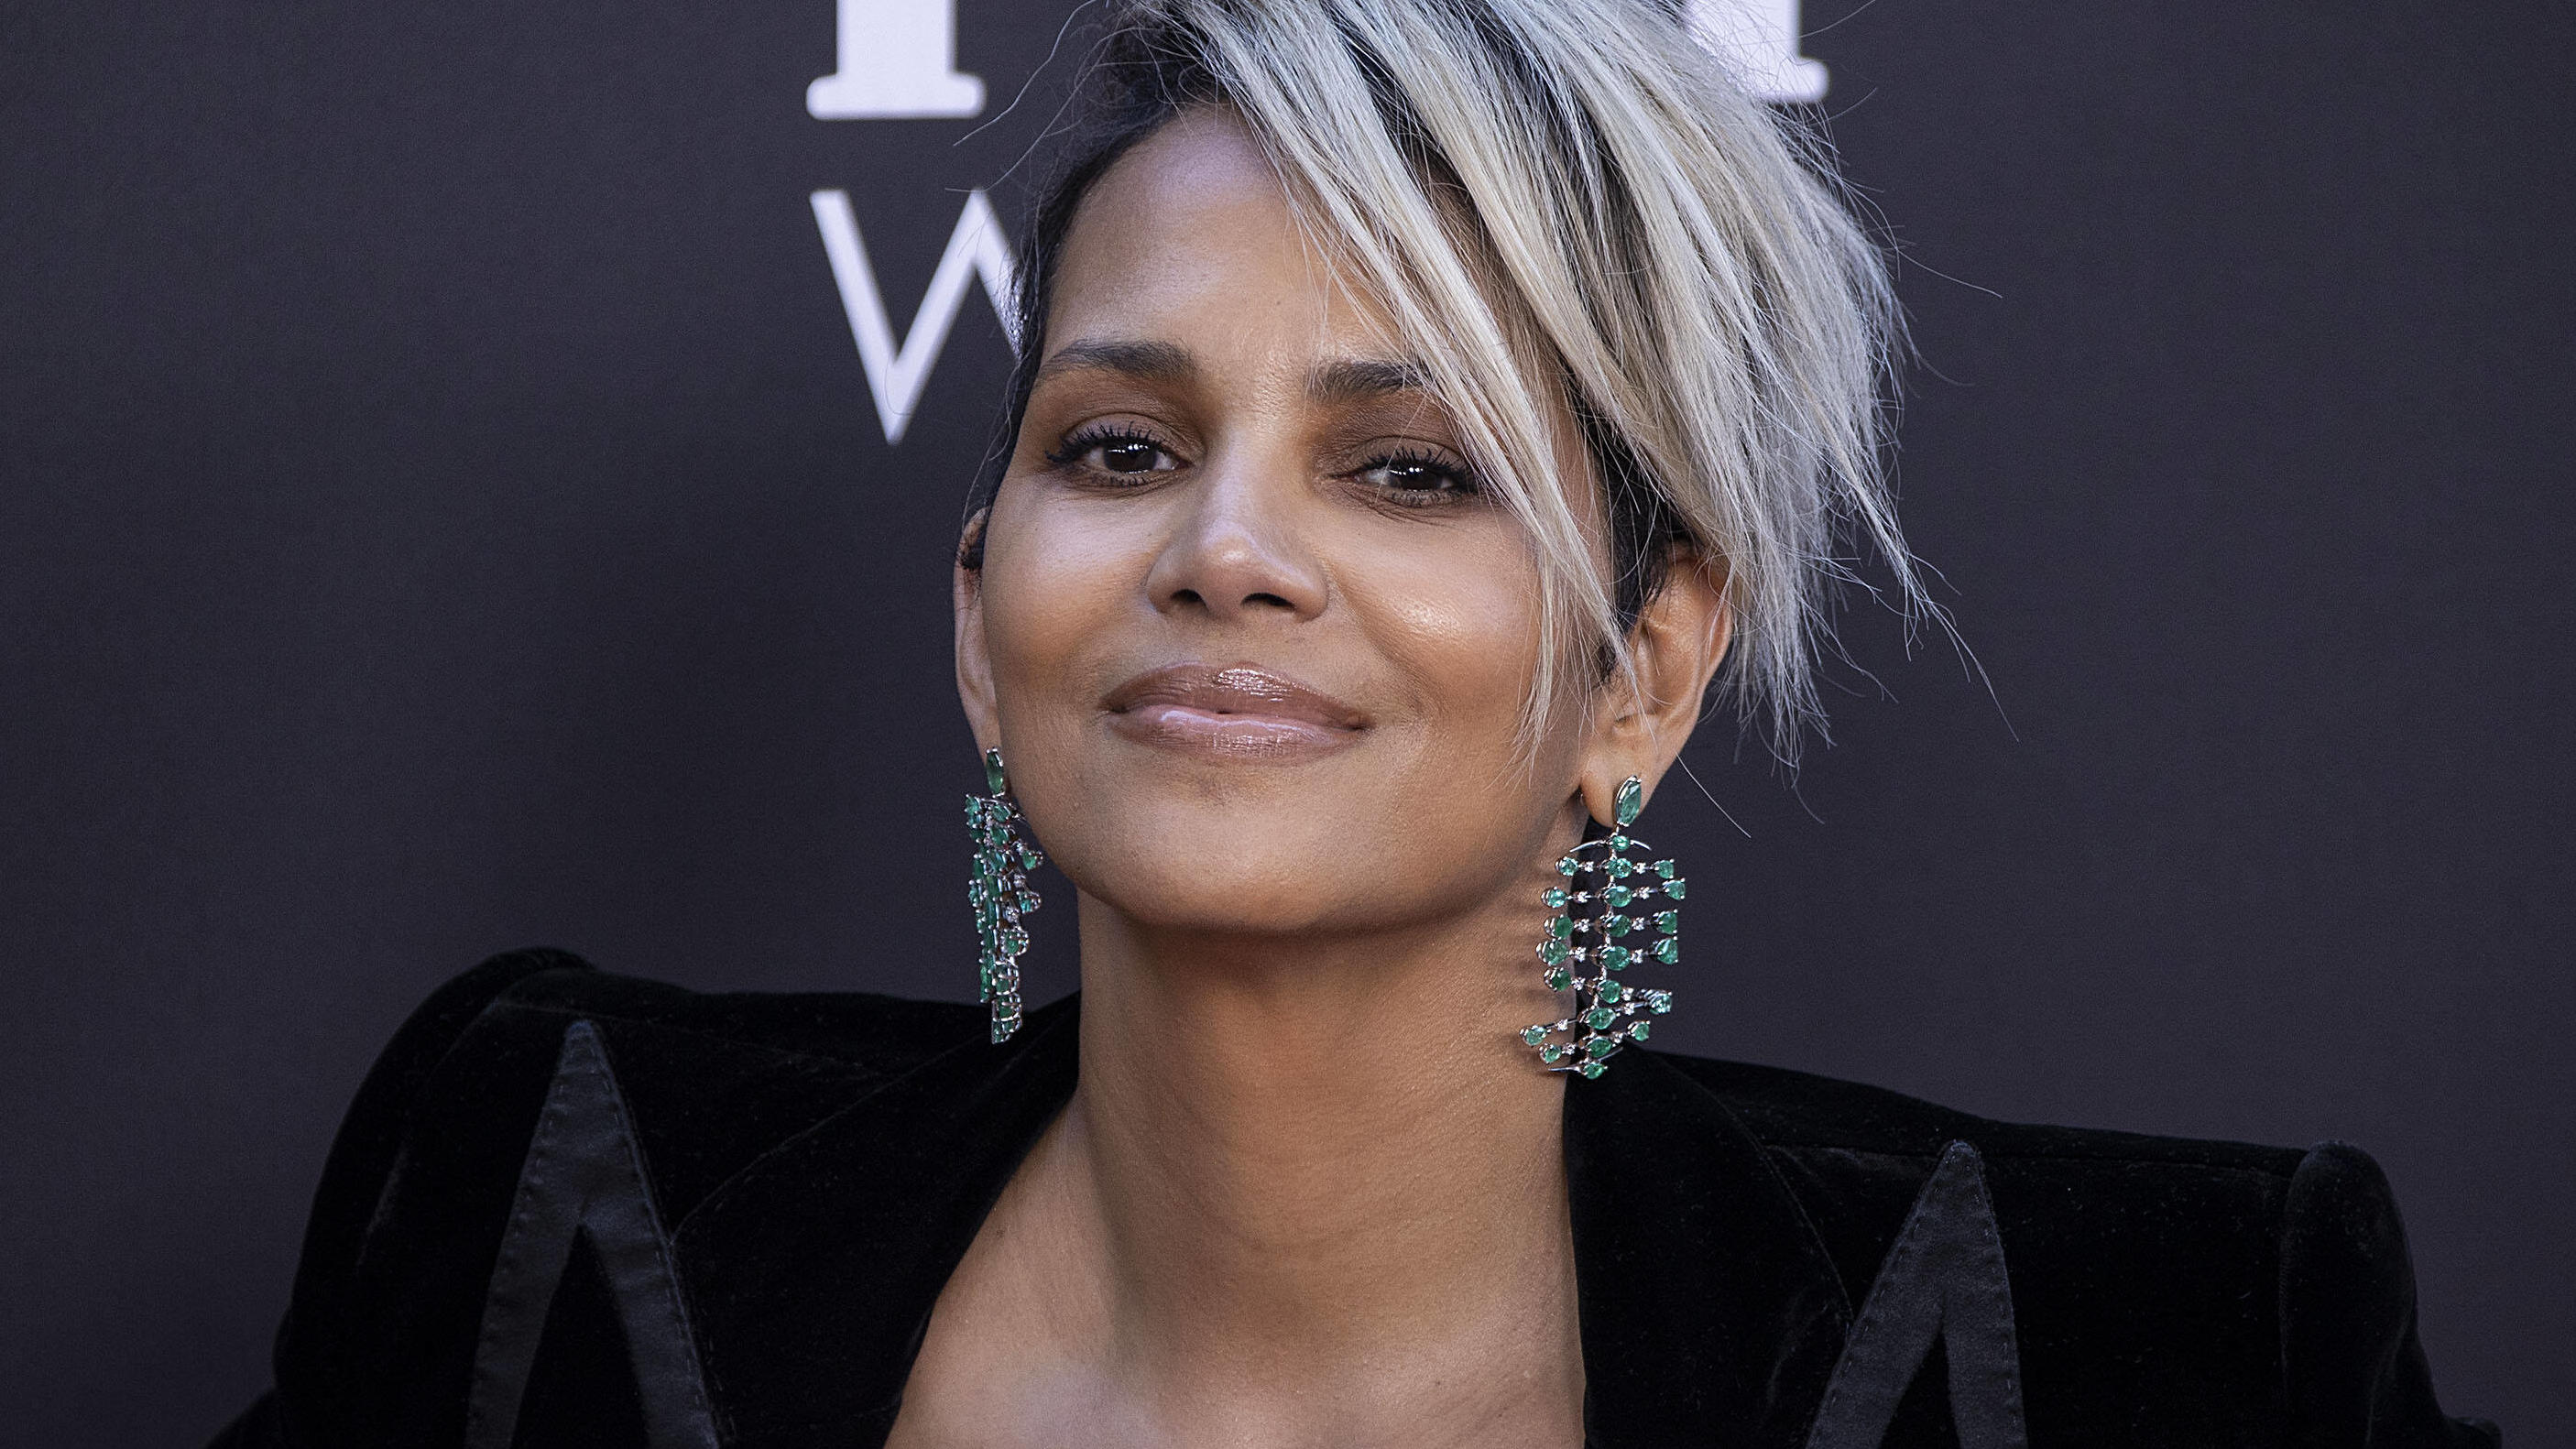 March 13, 2022, Century City, California, USA: Halle Berry at the red carpet of the 27th Critics Choice Awards on Sunday March 13, 2022 at the Fairmont Century Plaza in Century City, California. /PI Century City USA - ZUMAp124 20220313_zaa_p124_065 C